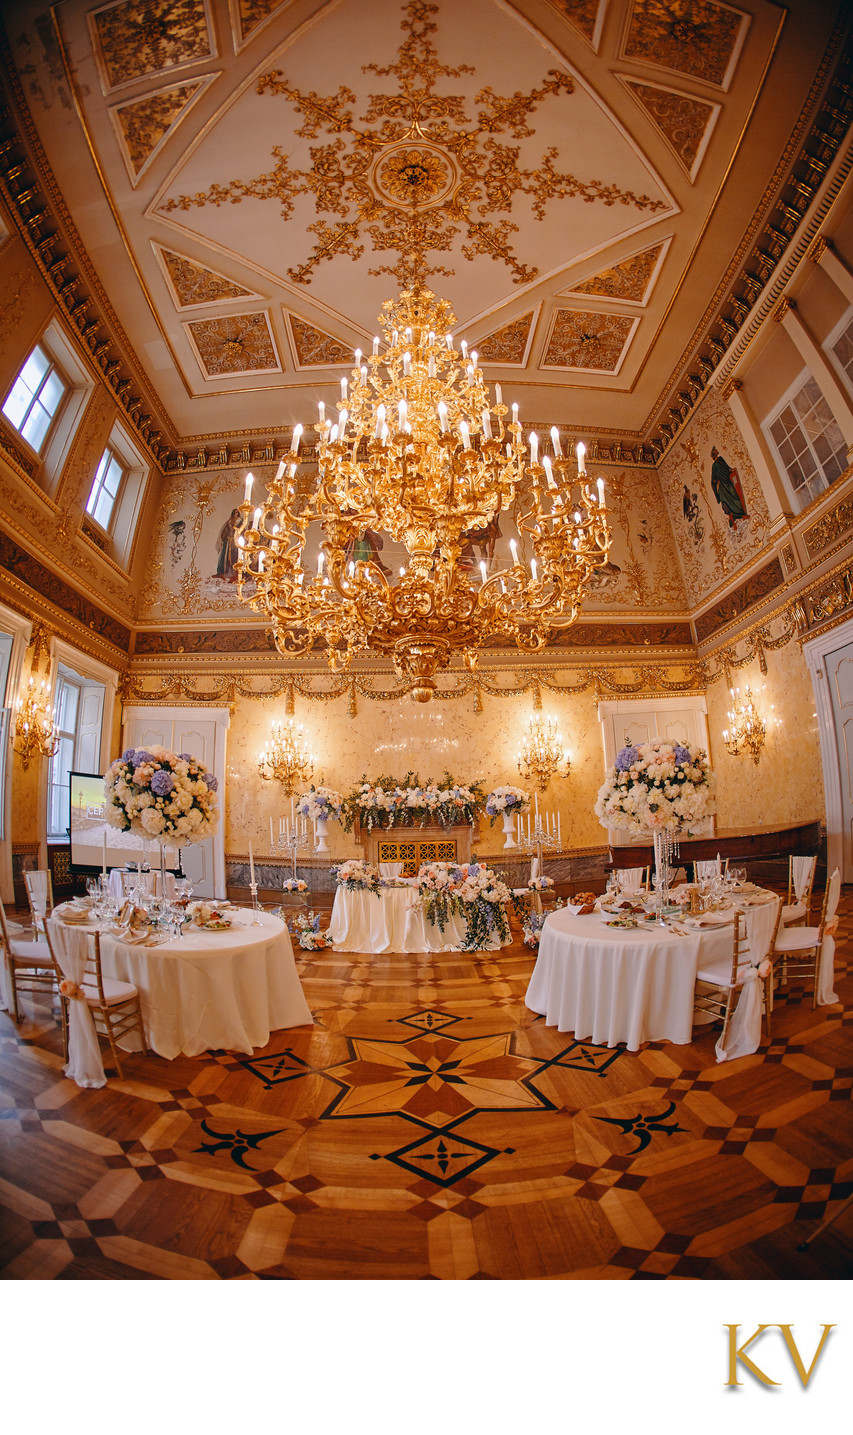 The bride & groom's table at the Kaunicky Palace